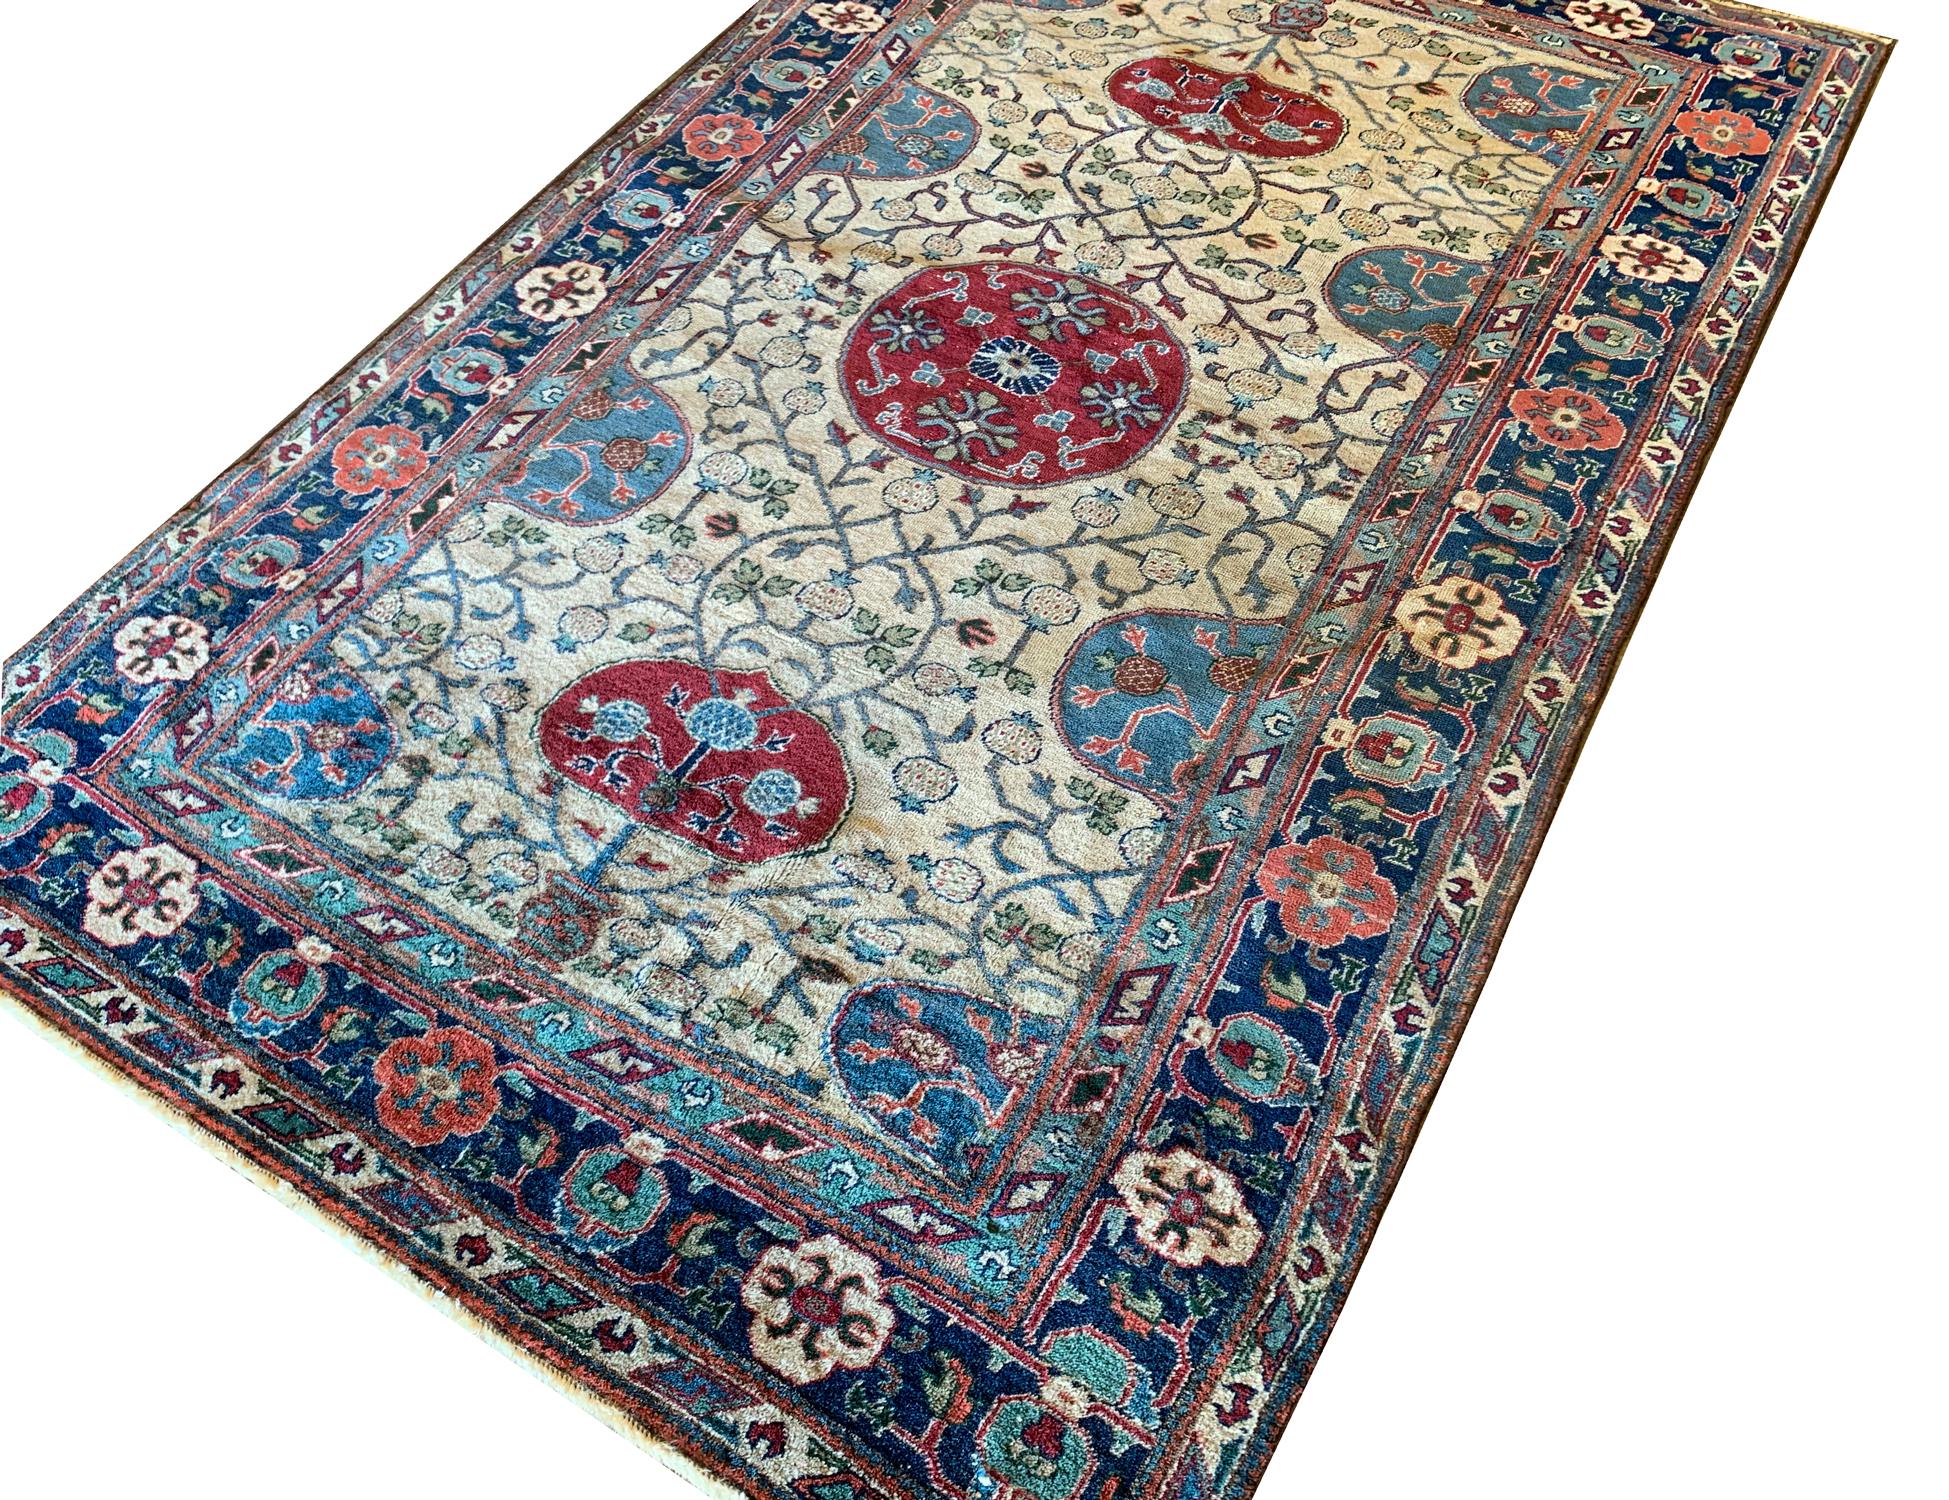 A bold circular medallion pattern decorates this fine wool rug. Constructed in central Asia, Khotan in the 1880s. The central design has been woven on a cream background and features a symmetrical design woven with red, blue and brown accents that